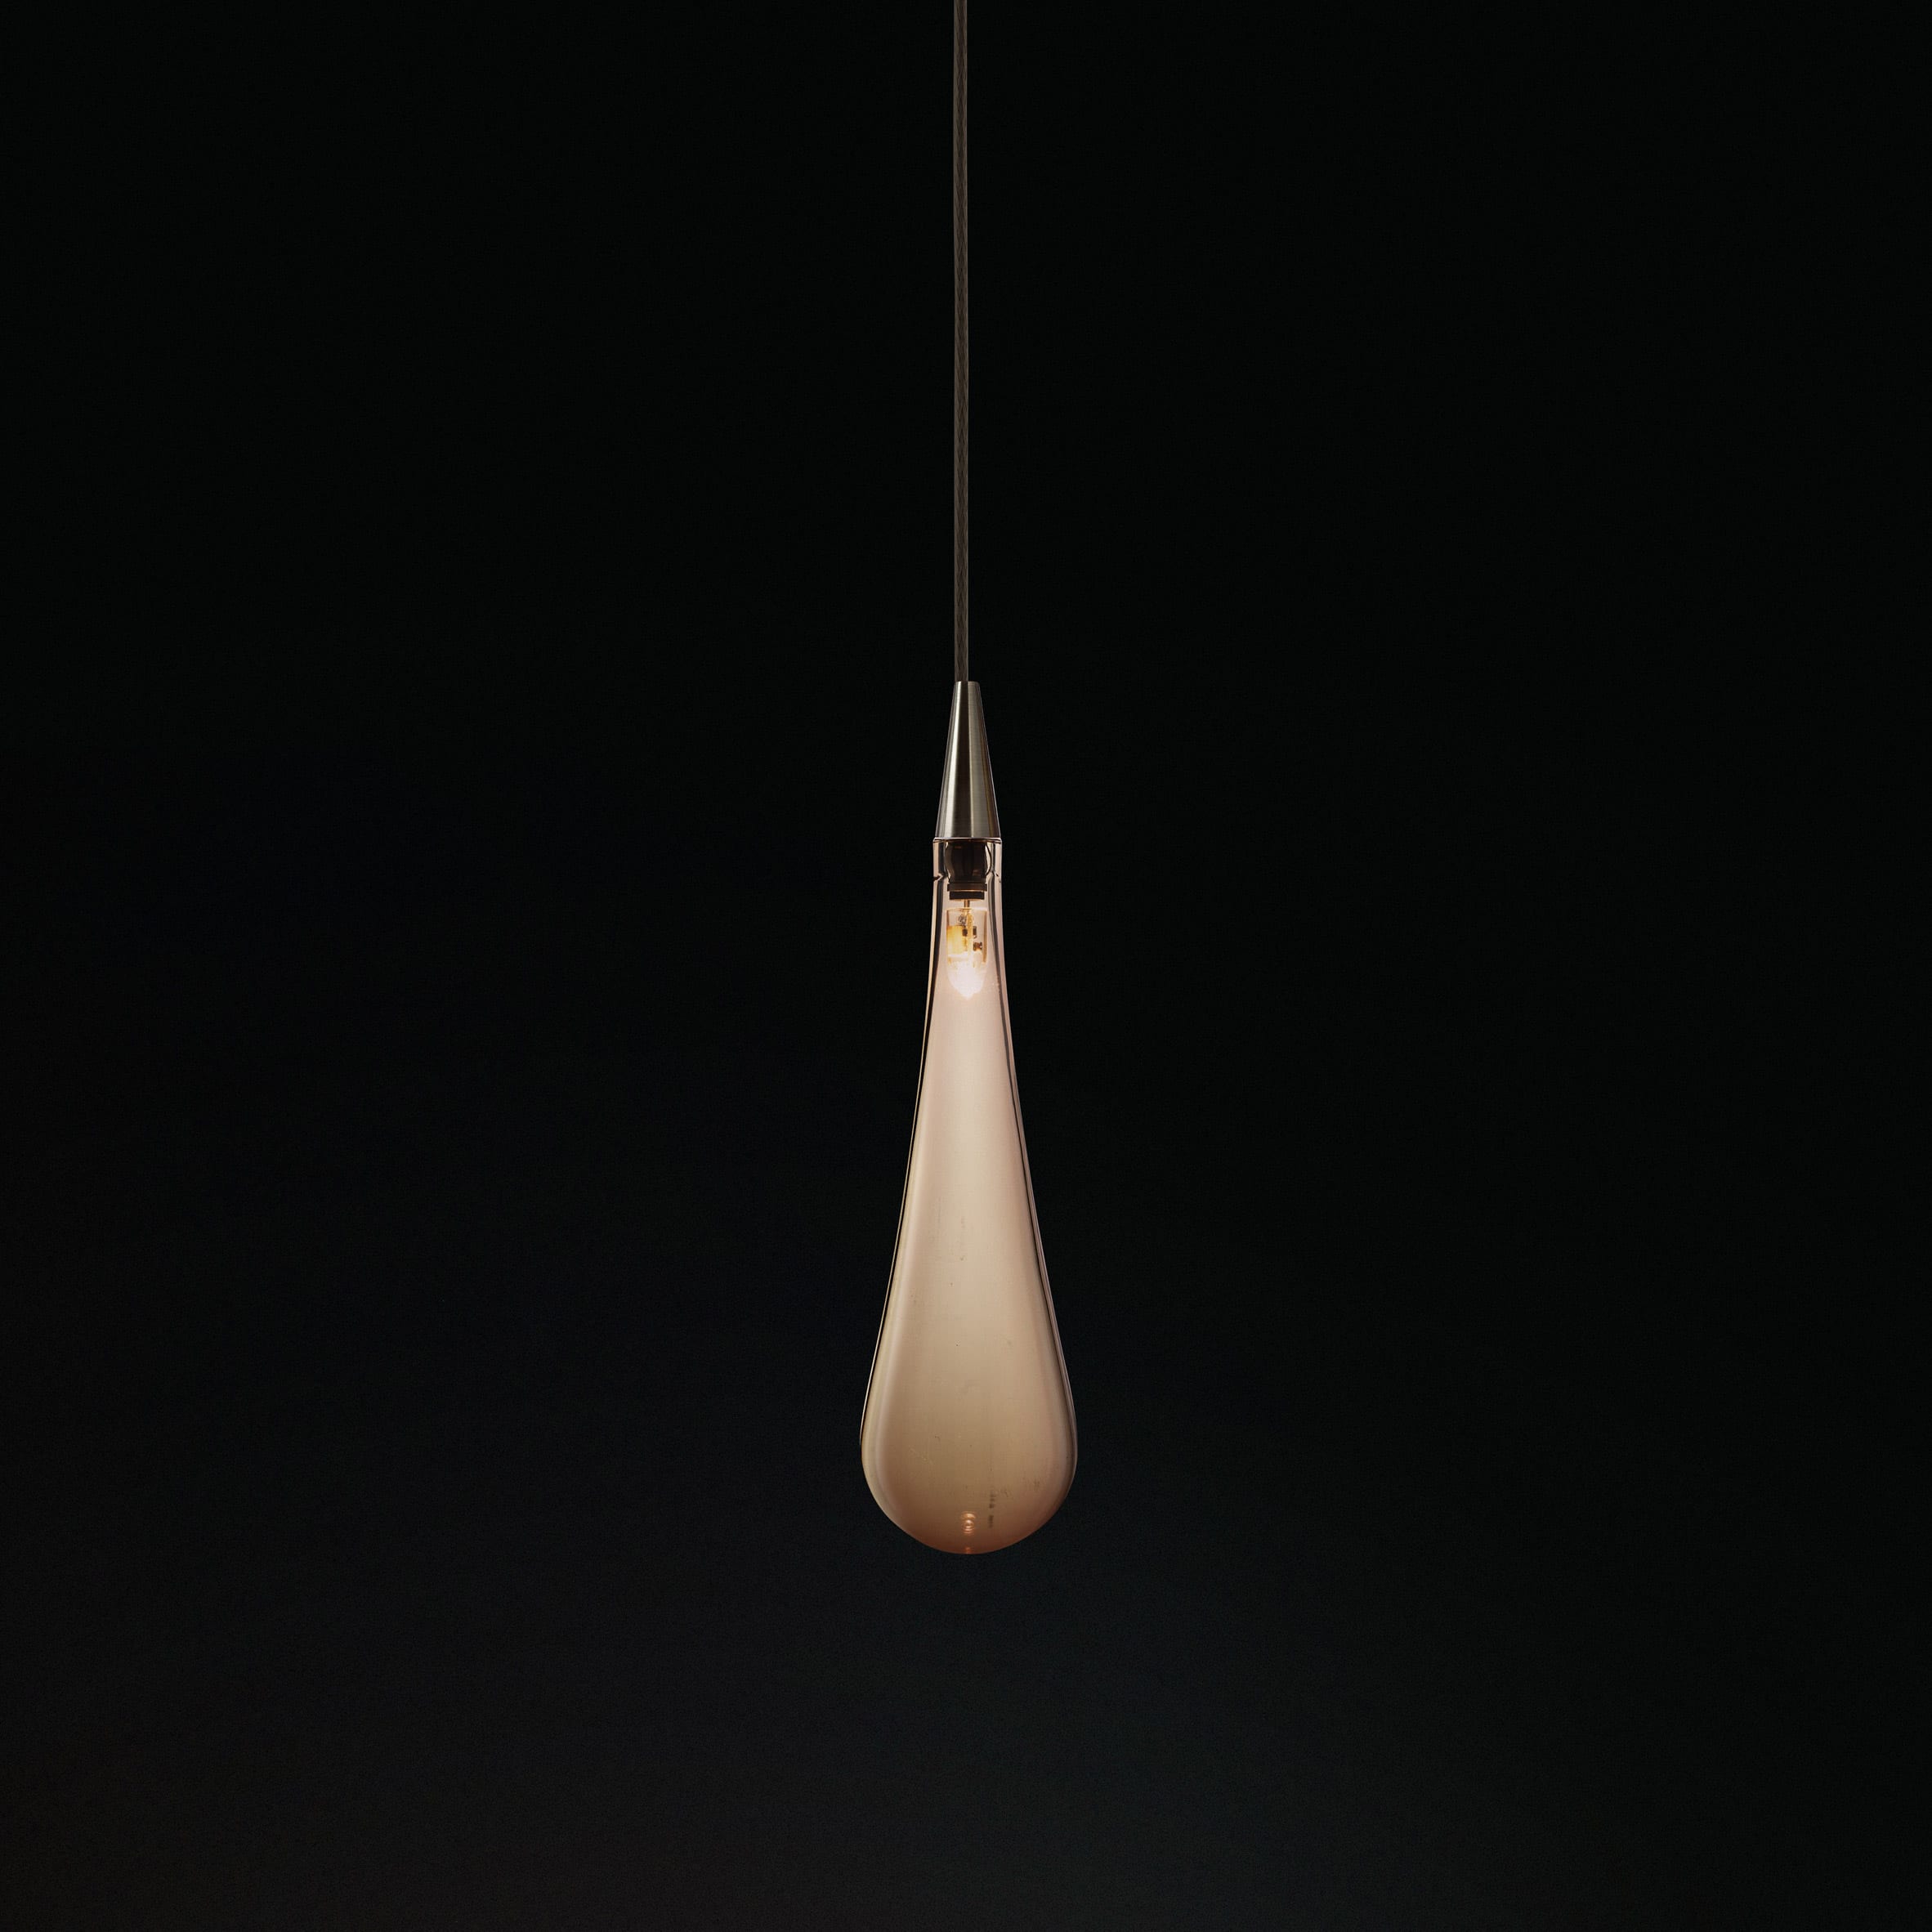 Raindrop collection by Shakúff: